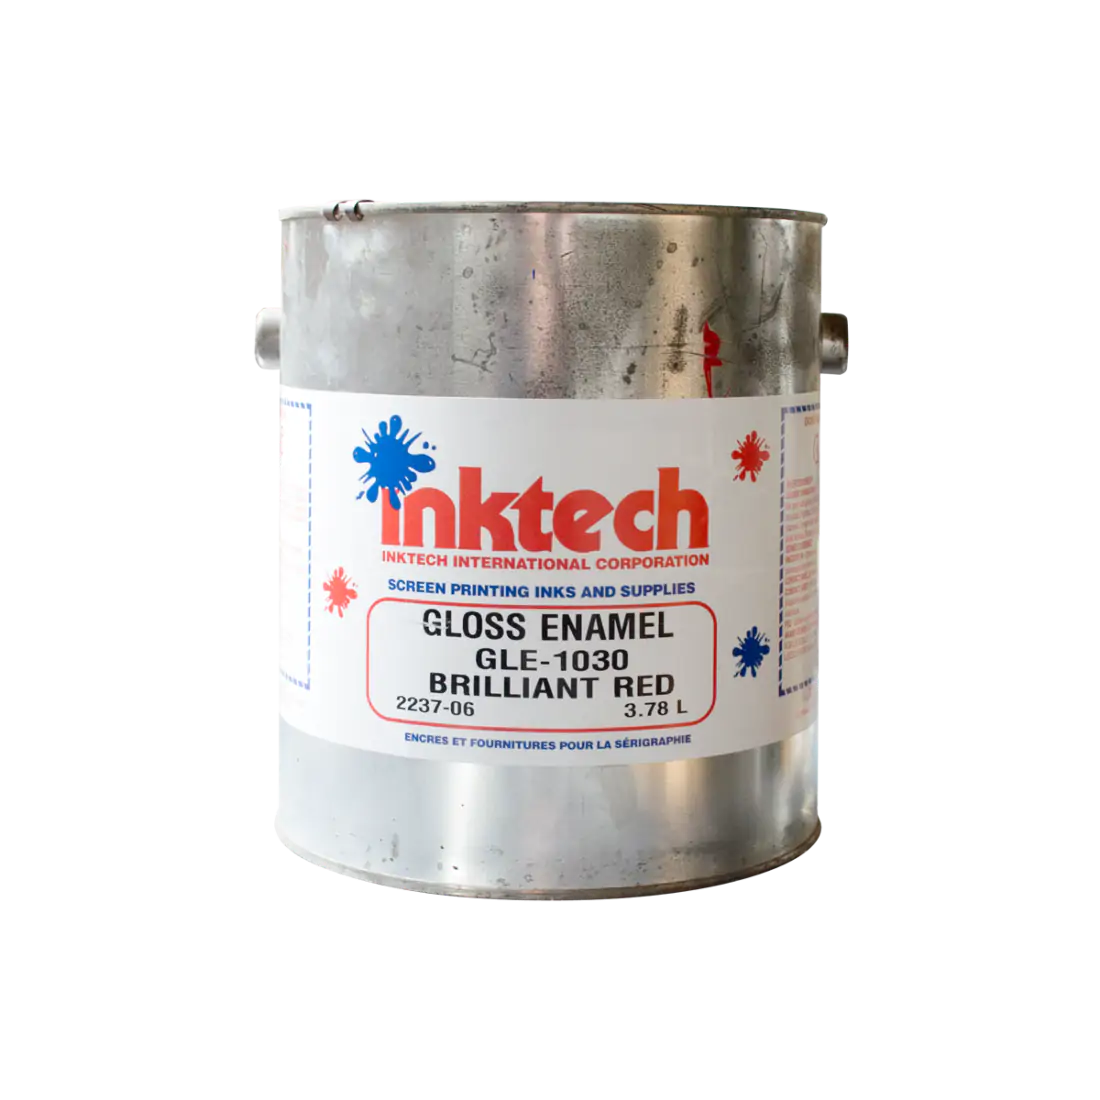 Inktech 3.7L Brilliant Red Ink can